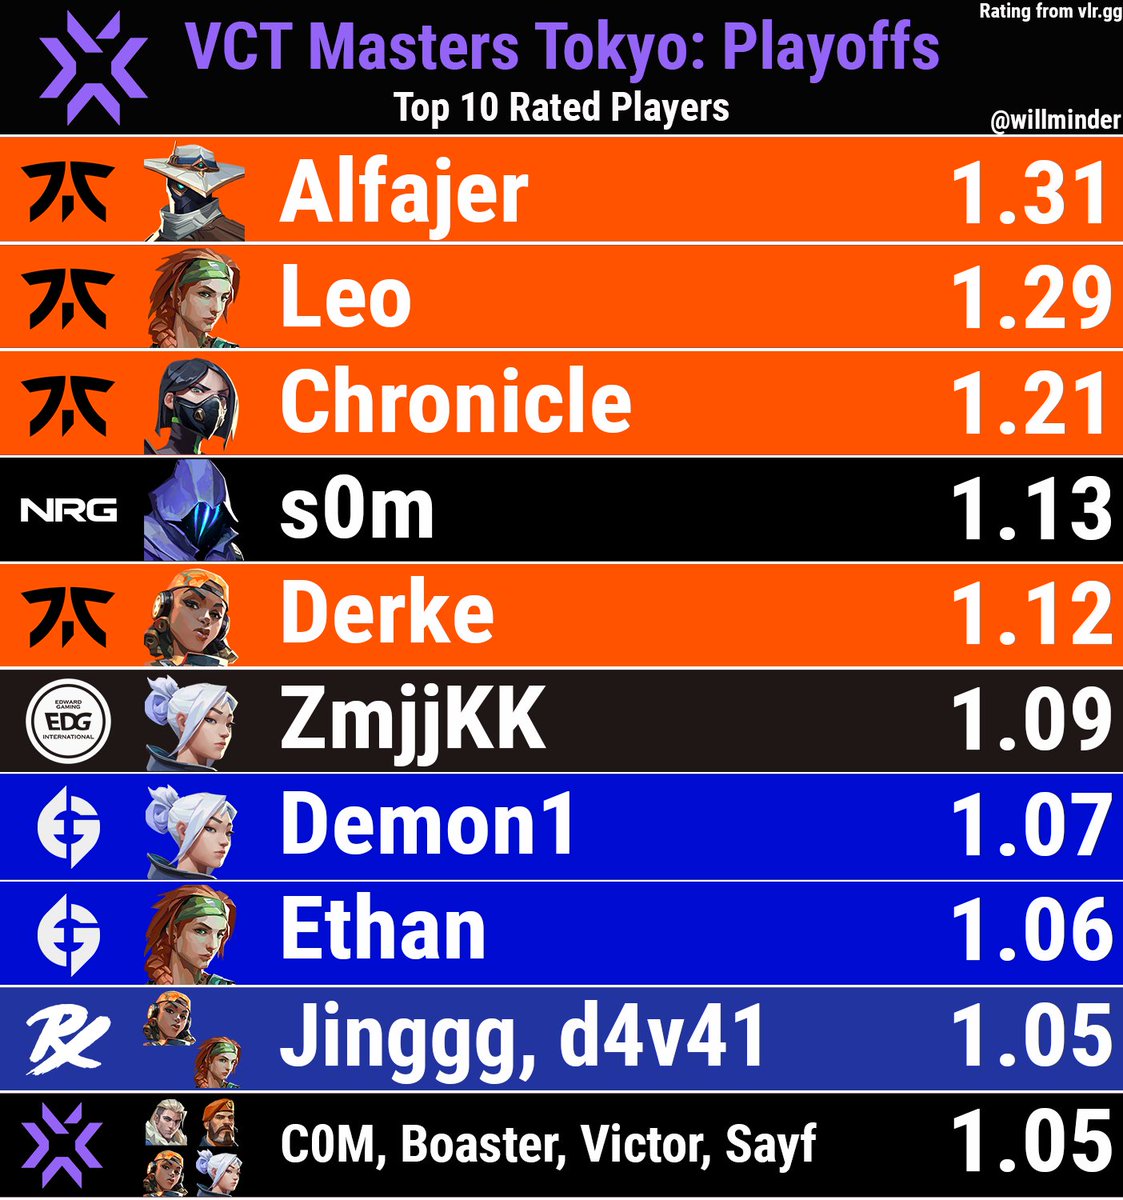 Top 10 rated players from the VCT Masters Tokyo Playoffs